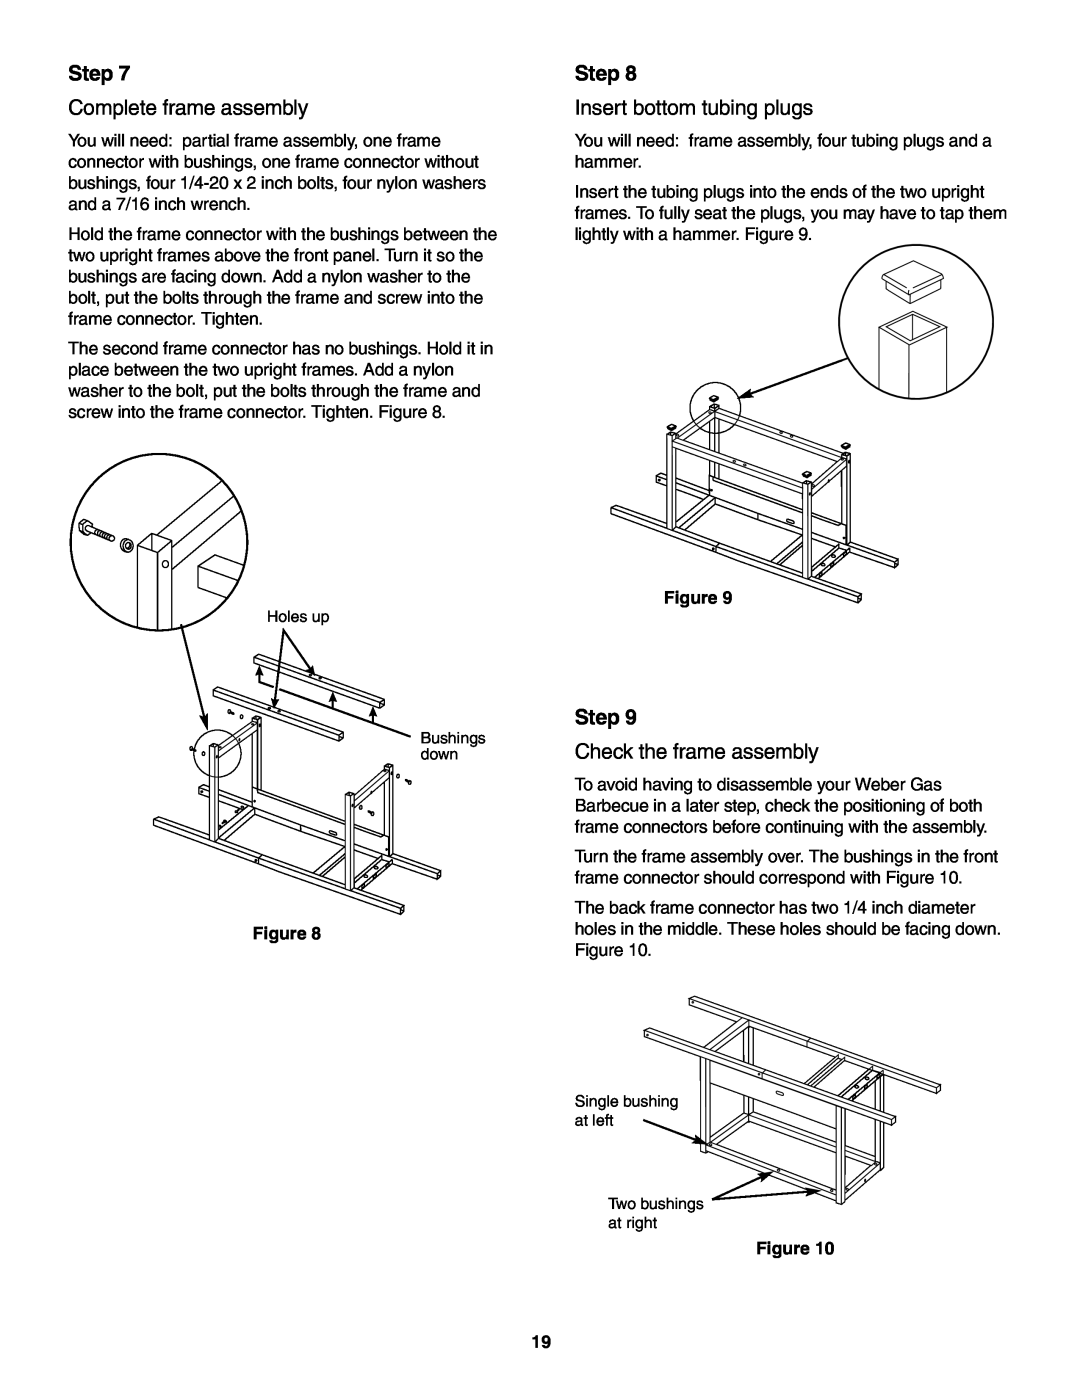 Weber 5500 owner manual Step, Complete frame assembly, Insert bottom tubing plugs, Check the frame assembly 